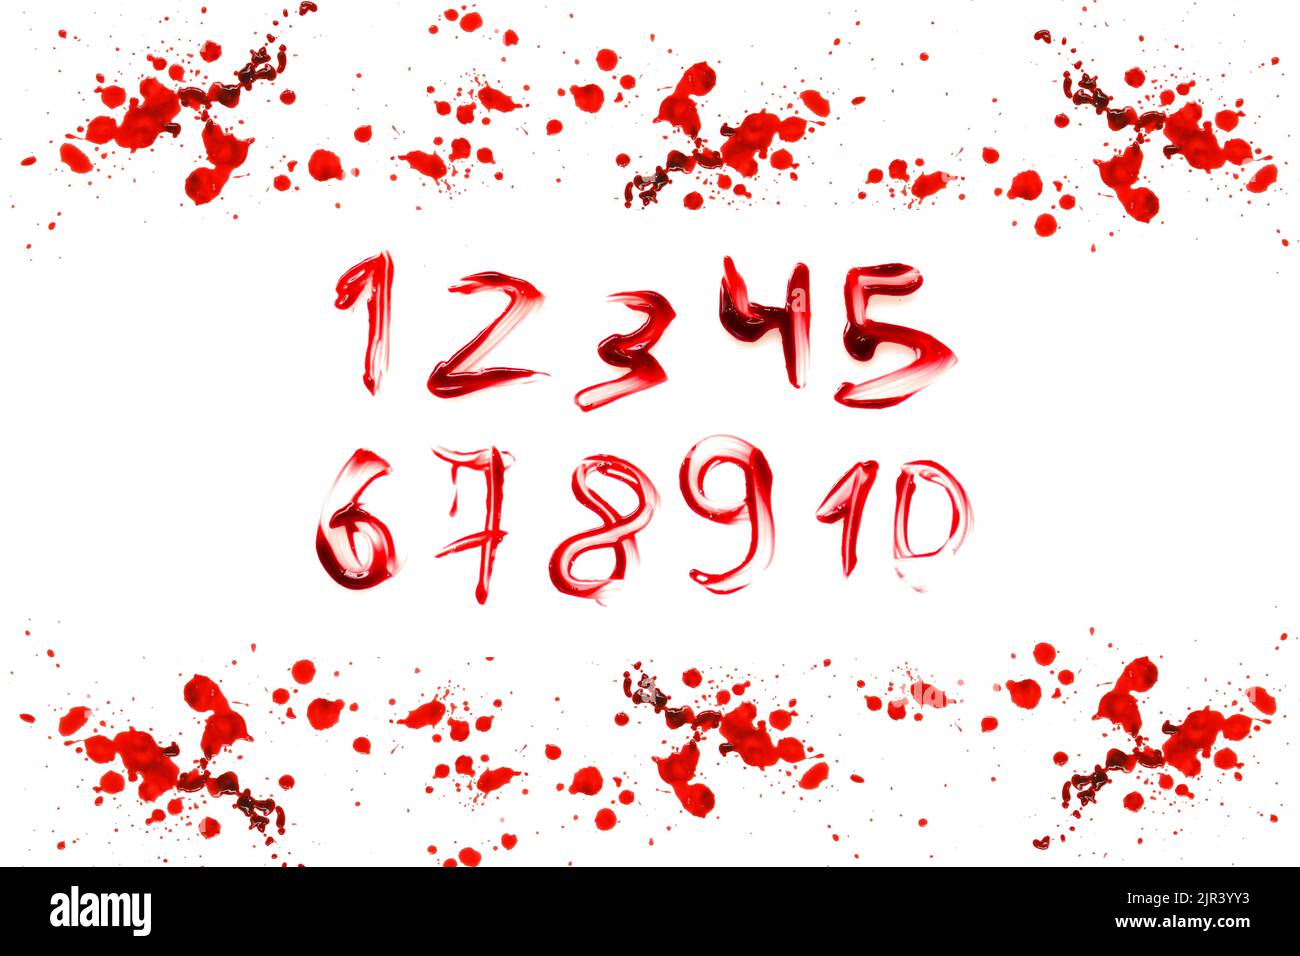 bloody numbers in a red frame made of bloody drops.numbers written in blood. Horror and crime.Halloween alphabet. Crime alphabet. Stock Photo